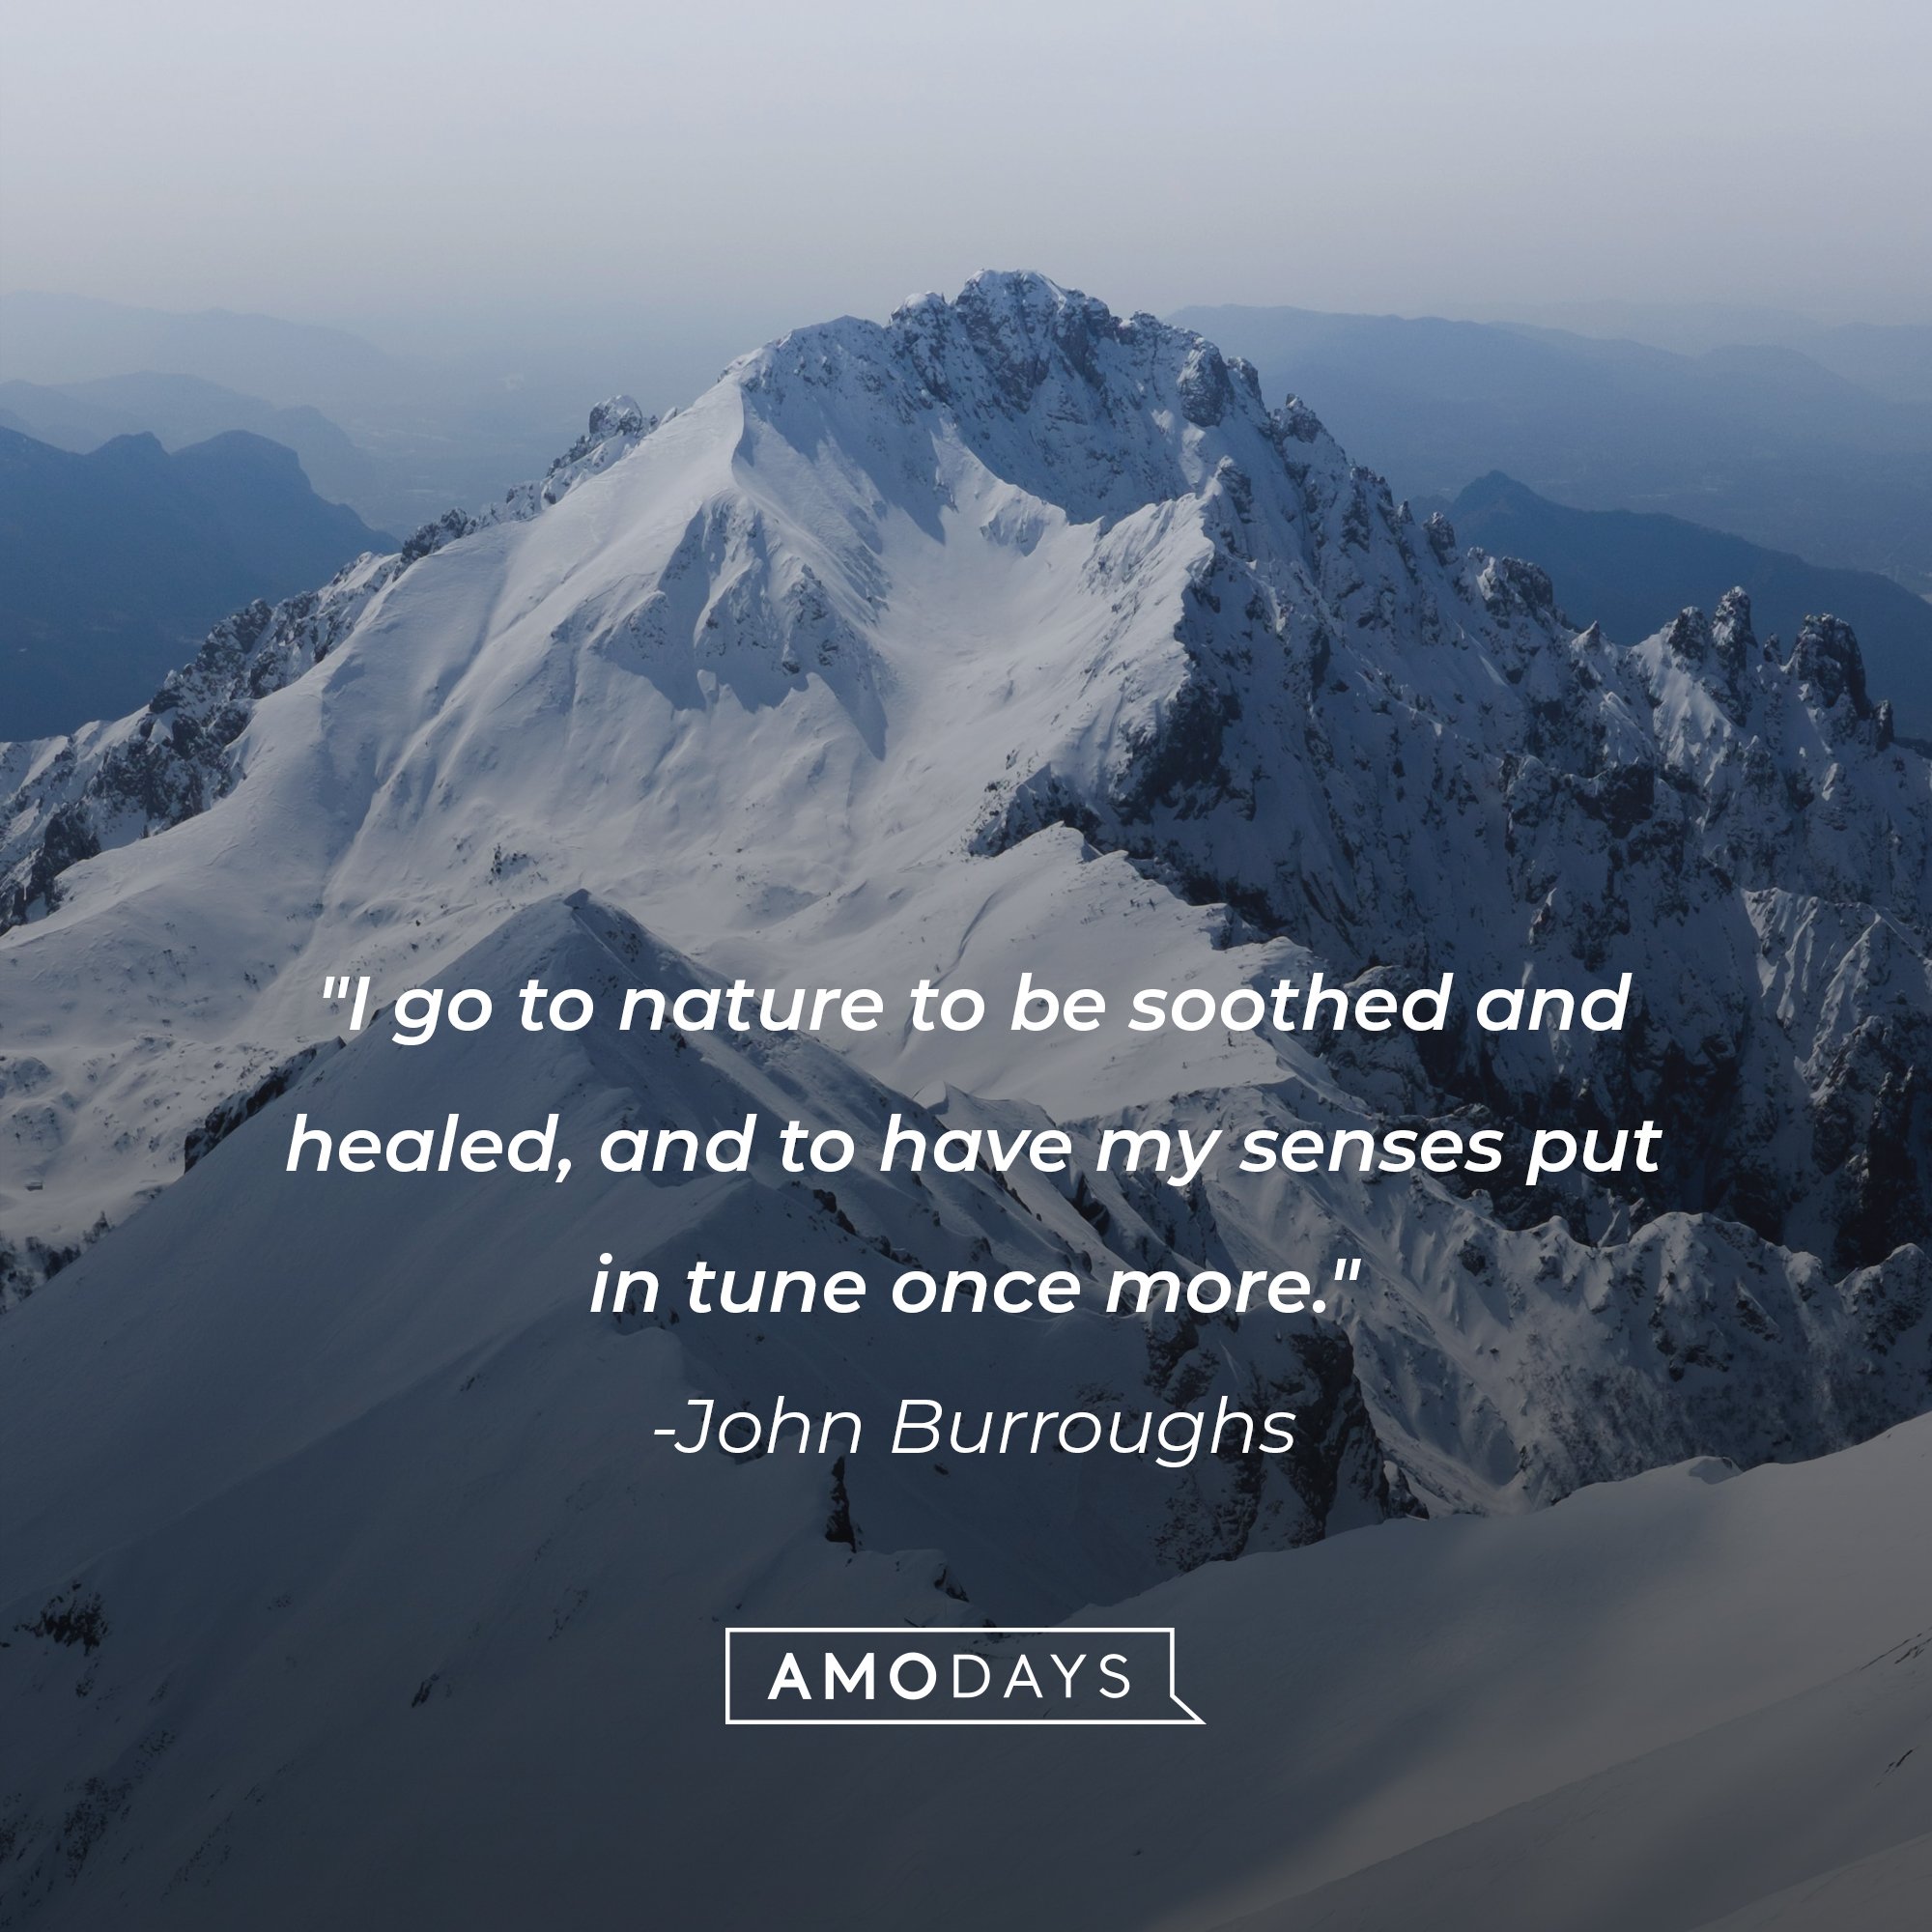 John Burroughs' quote: "I go to nature to be soothed and healed, and to have my senses put in tune once more." | Image: AmoDays